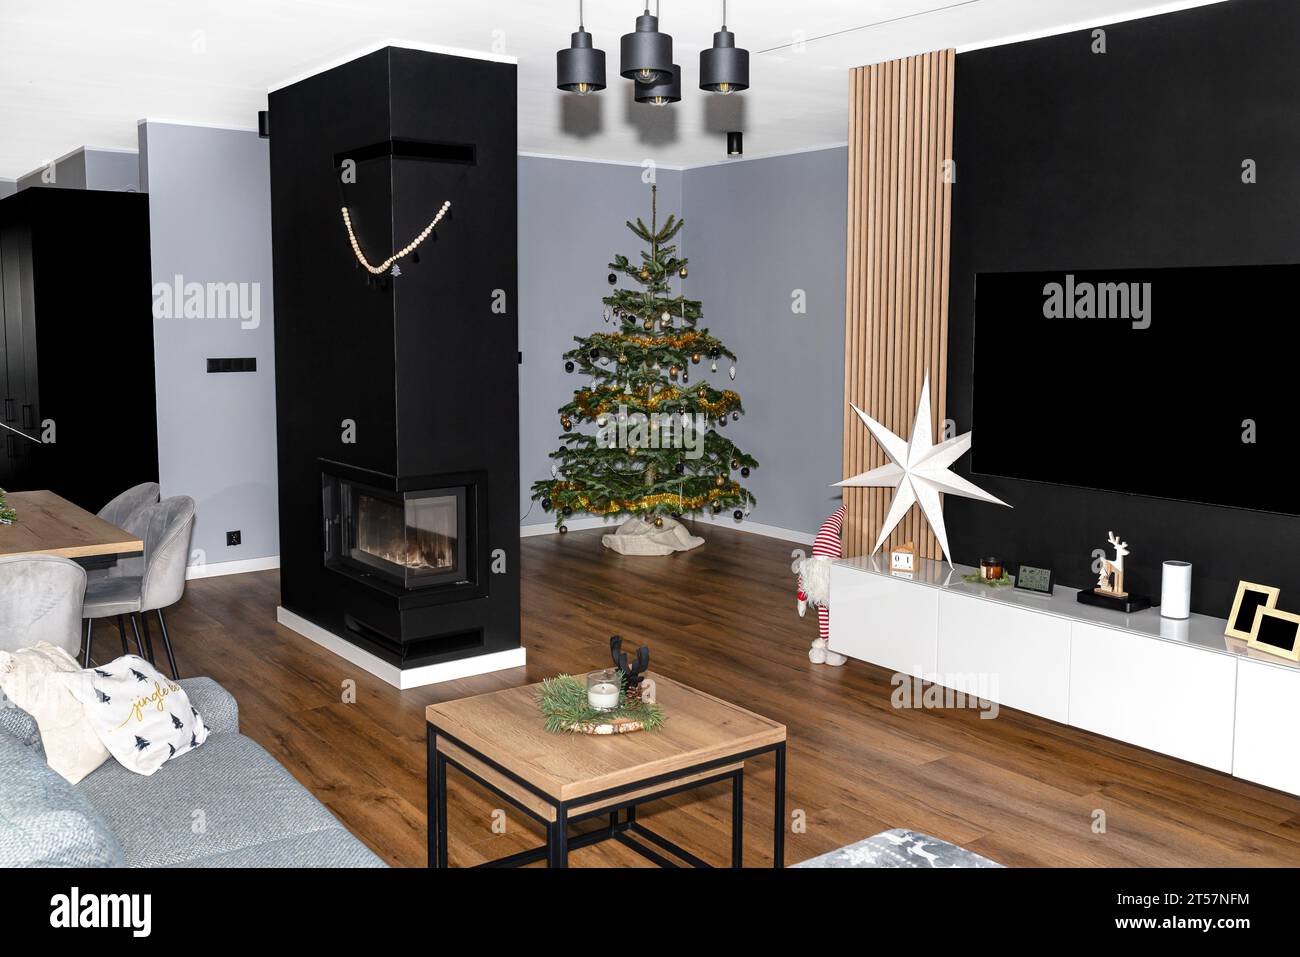 A Christmas tree made of Caucasian fir decorated with baubles stands in the hall of a modern house, with a fireplace visible in the living room. Stock Photo